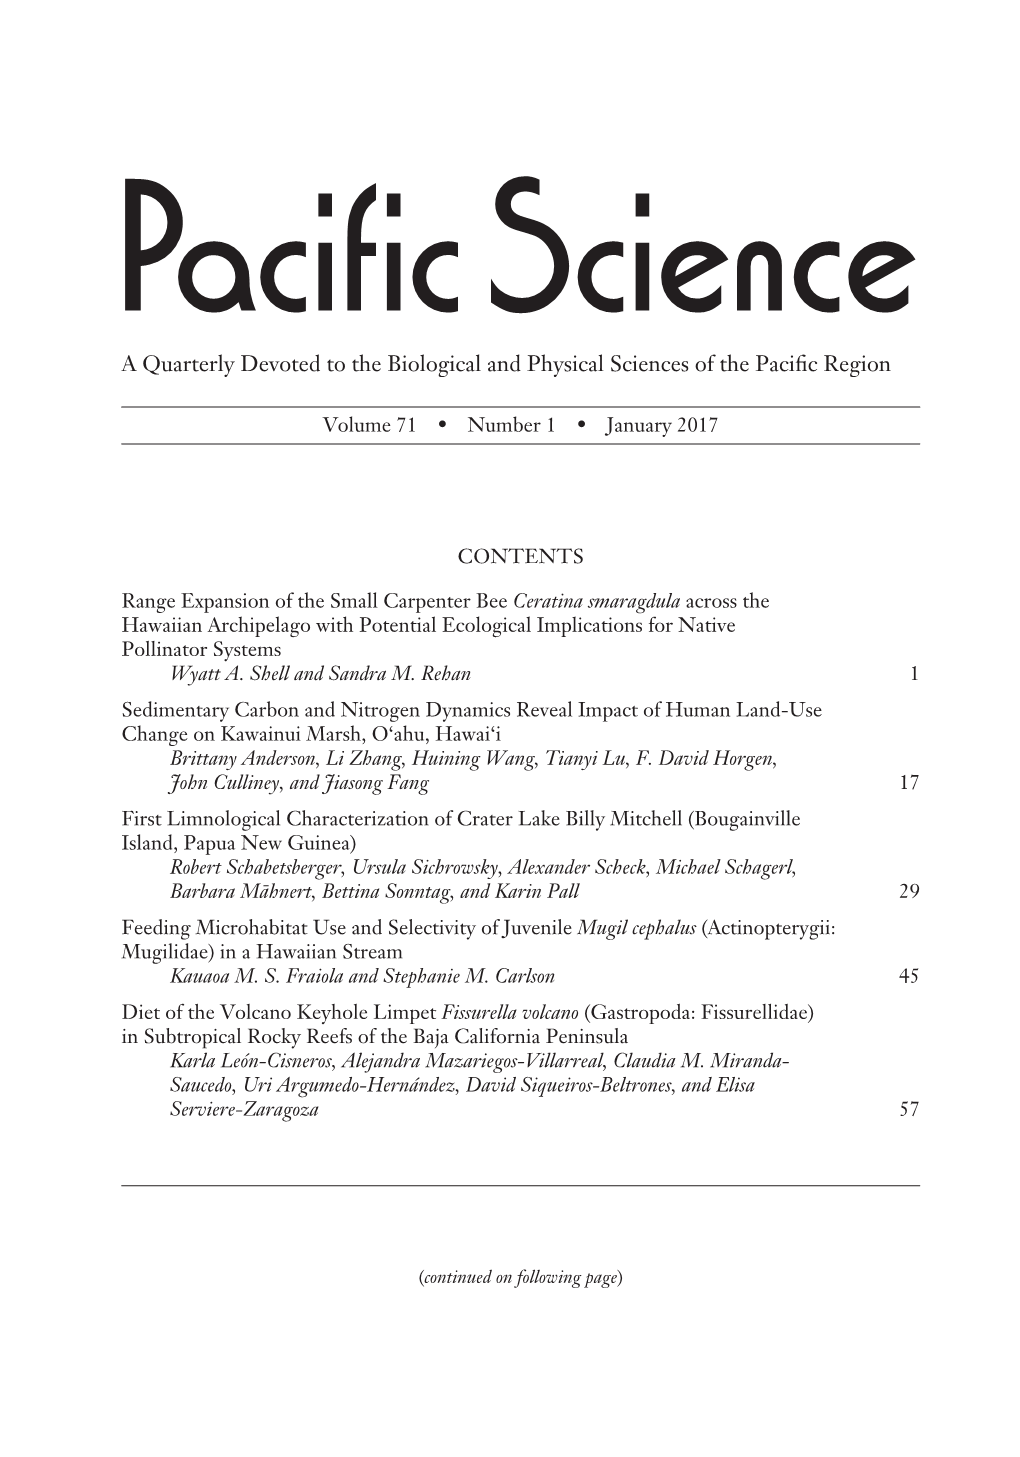 A Quarterly Devoted to the Biological and Physical Sciences of the Pacific Region